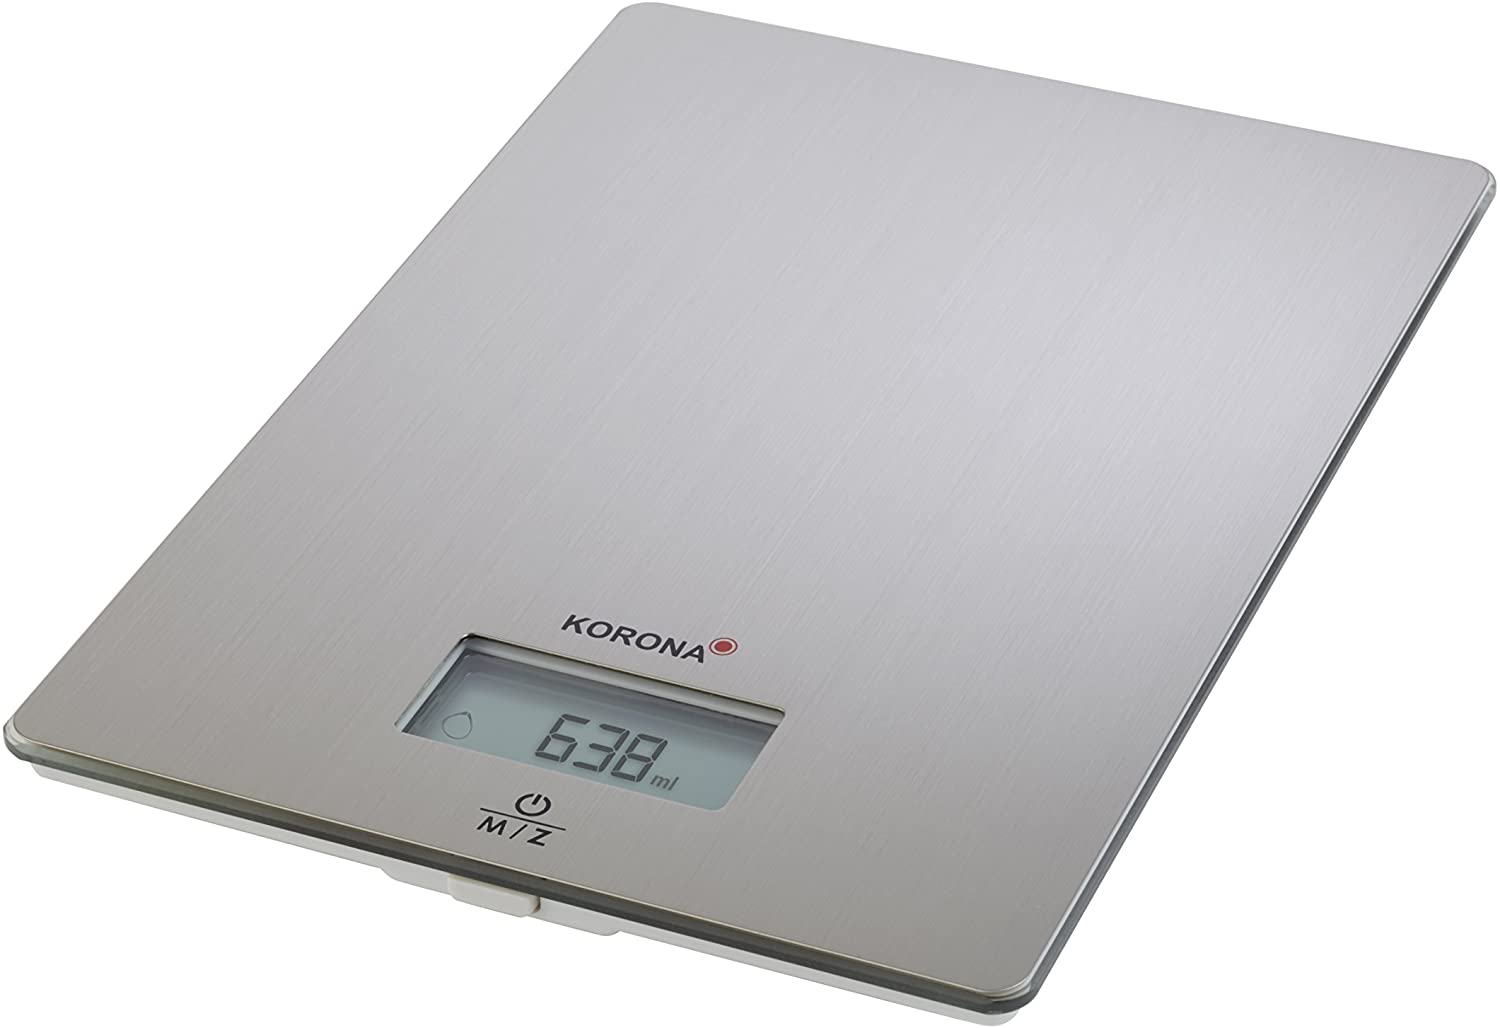 Korona Kelly 76135 Electronic Kitchen Scales Brushed Stainless Steel Very Flat Design